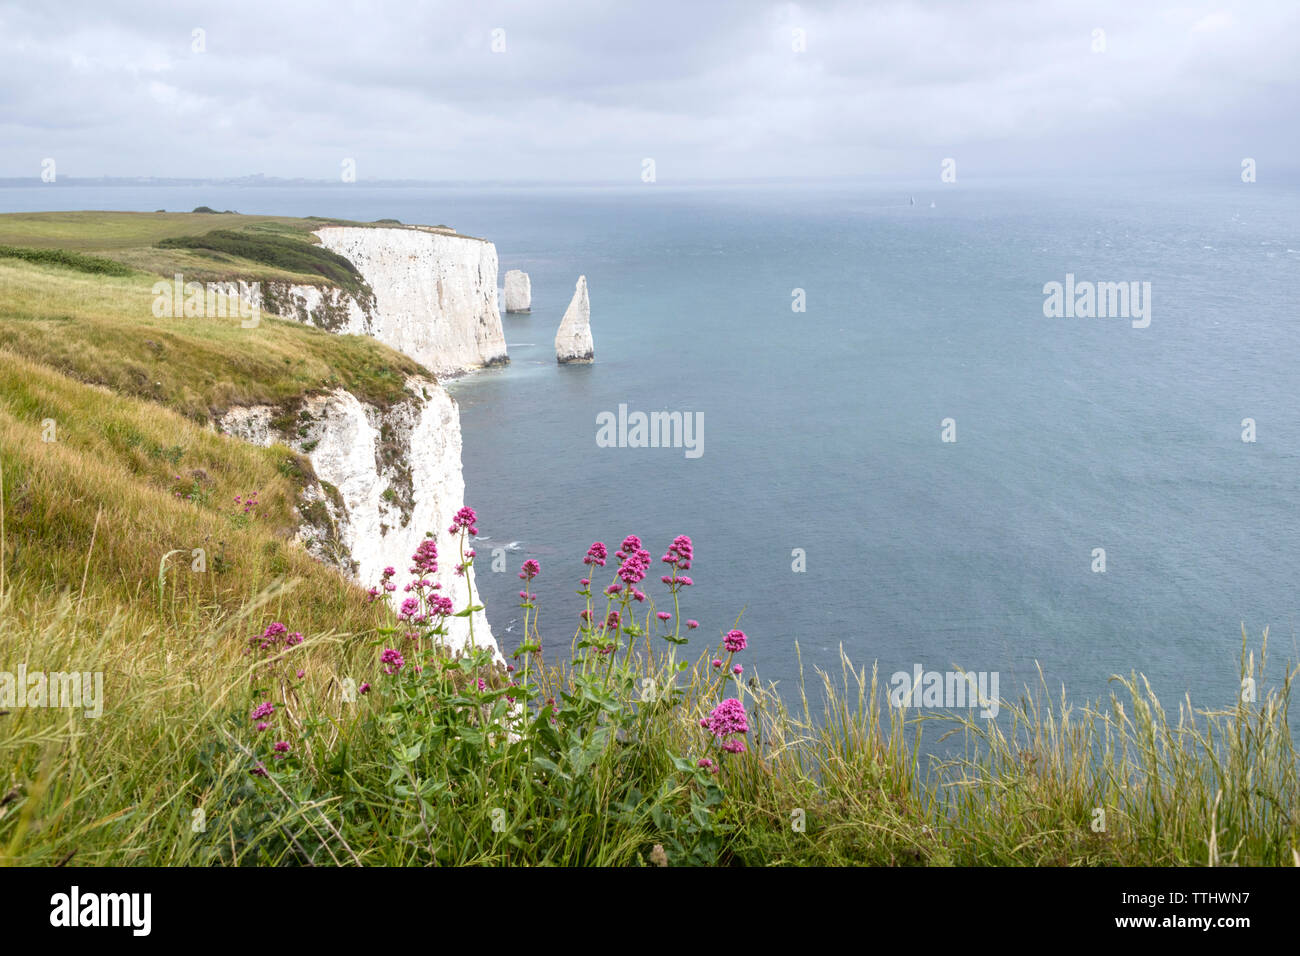 The Pinnacles at Handfast Point, Isle of Purbeck, Jurassic Coast, a UNESCO World Heritage Site in Dorset, England, UK Stock Photo